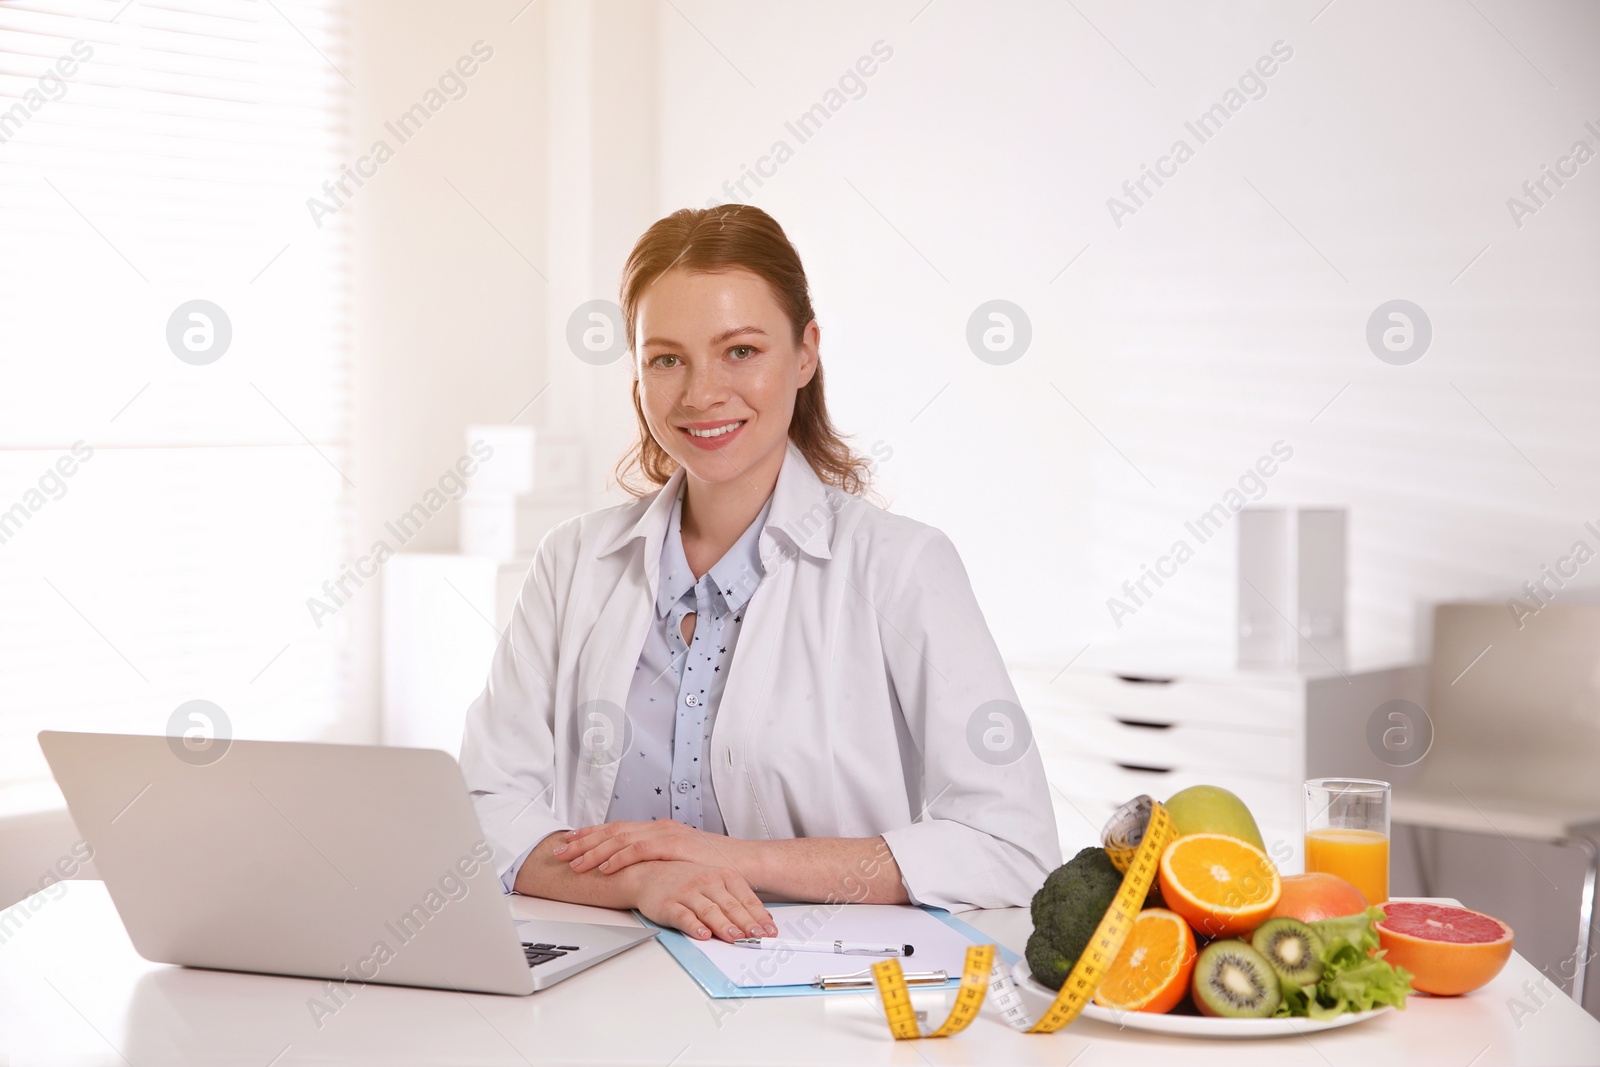 Image of Nutritionist with clipboard and laptop at desk in office